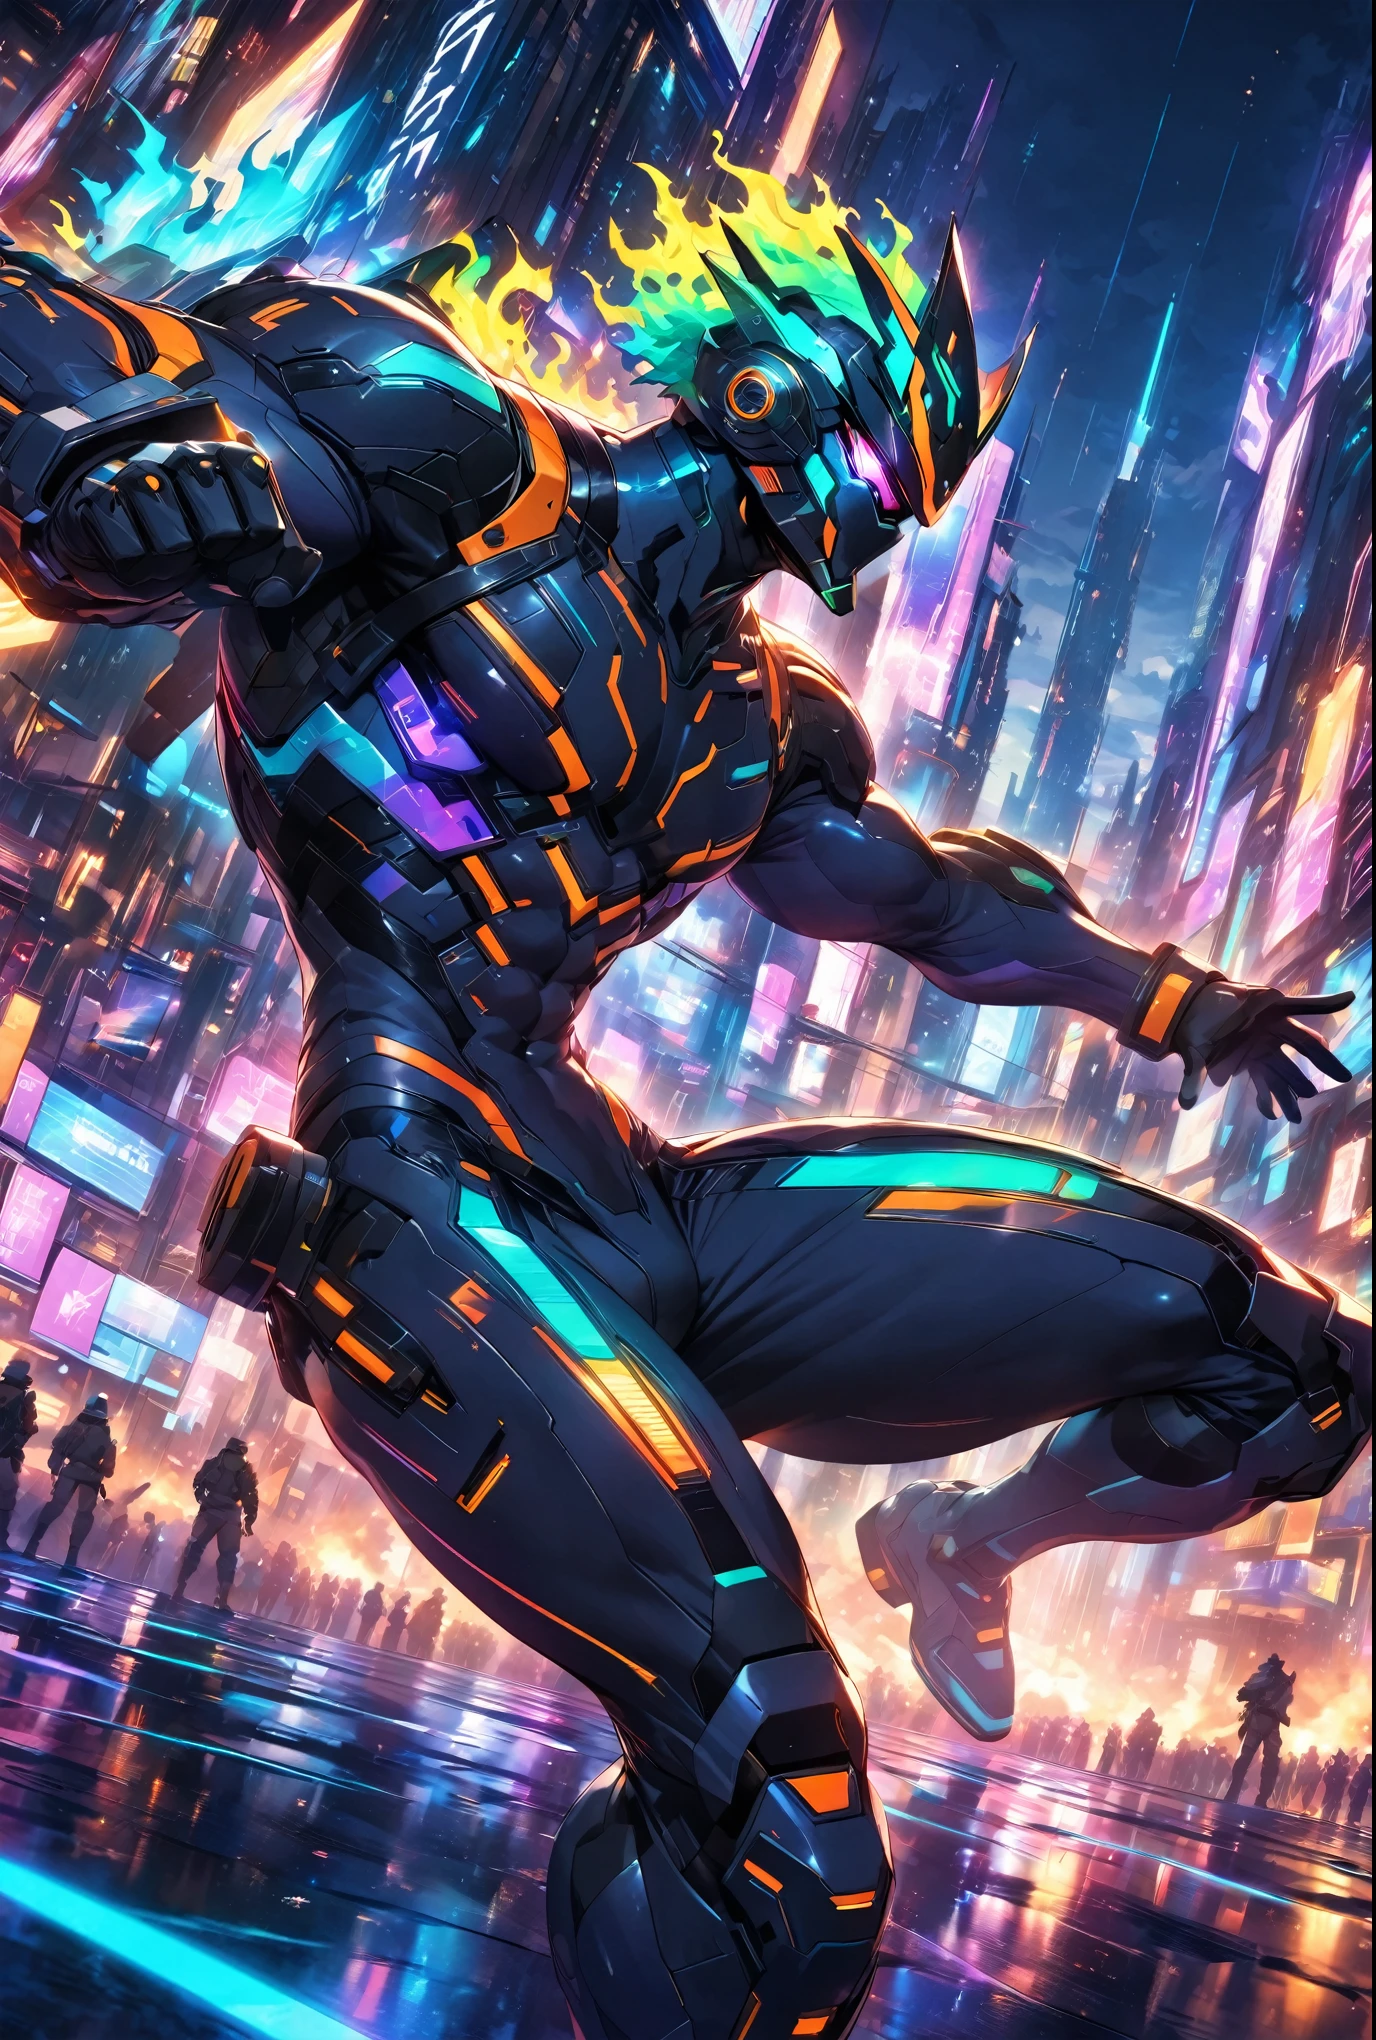 "A handsome man wearing a sleek, body-hugging combat suit in a cyberpunk setting. The suit is crafted from high-durability, lightweight materials, featuring an ergonomic design with vibrant neon lines and patterns in a variety of colors, including electric blue, neon green, fiery red, and bright purple, all tracing the contours of his muscular physique. The suit includes reinforced joints and embedded sensors, seamlessly integrated into the fabric. He has no helmet, revealing his sharp features and intense expression, with short, stylishly tousled hair. The scene is set in a chaotic urban battlefield, illuminated by a cacophony of neon lights and holographic advertisements. The background features towering skyscrapers and flying vehicles, with vibrant, colorful lights reflecting off the wet surfaces. In the midst of combat, explosions and energy blasts create dynamic lighting effects, casting dramatic shadows and highlighting the action-packed atmosphere."
